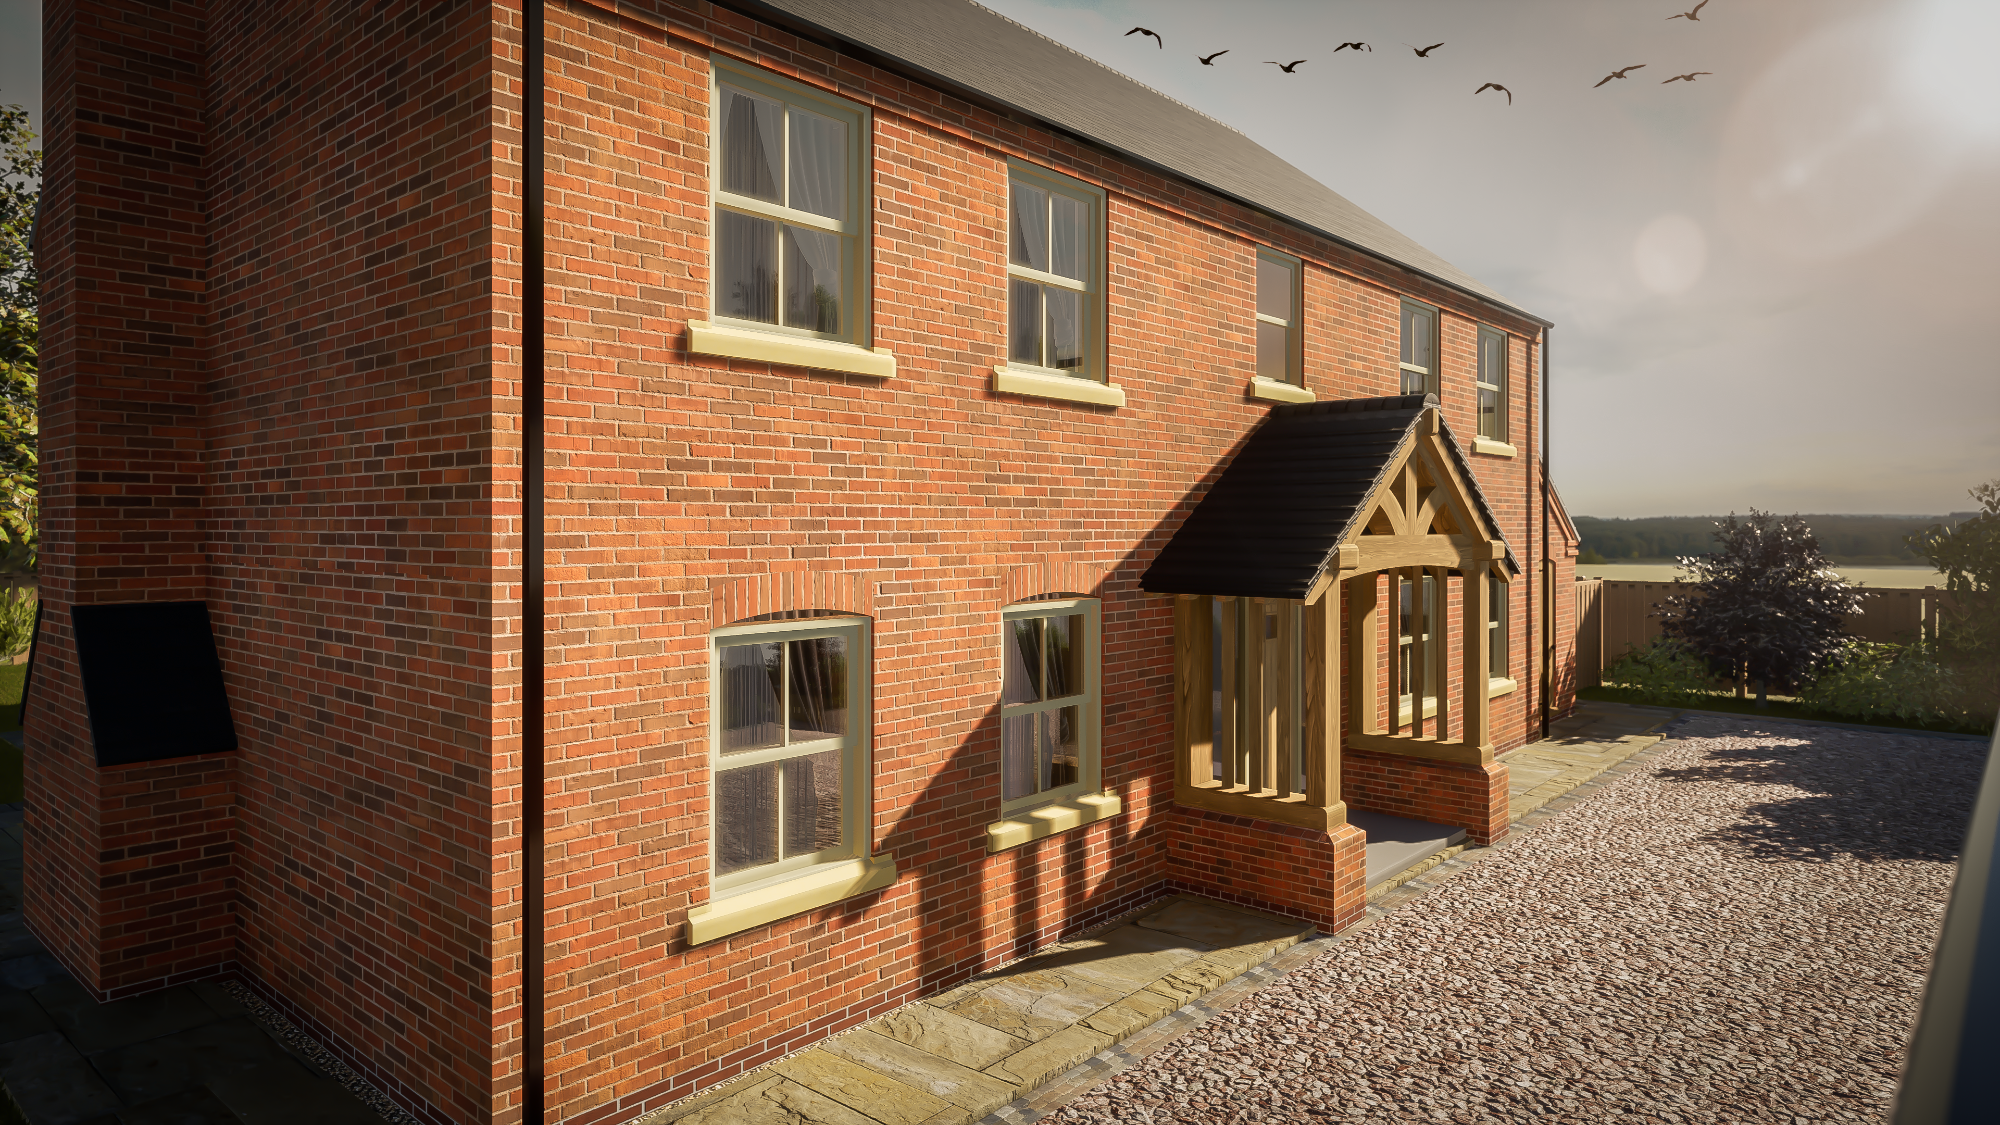 Planning permissions approved, project updates and latest news from Fytche-Taylor Planning â€“ planning consultants for Lincoln and Lincolnshire